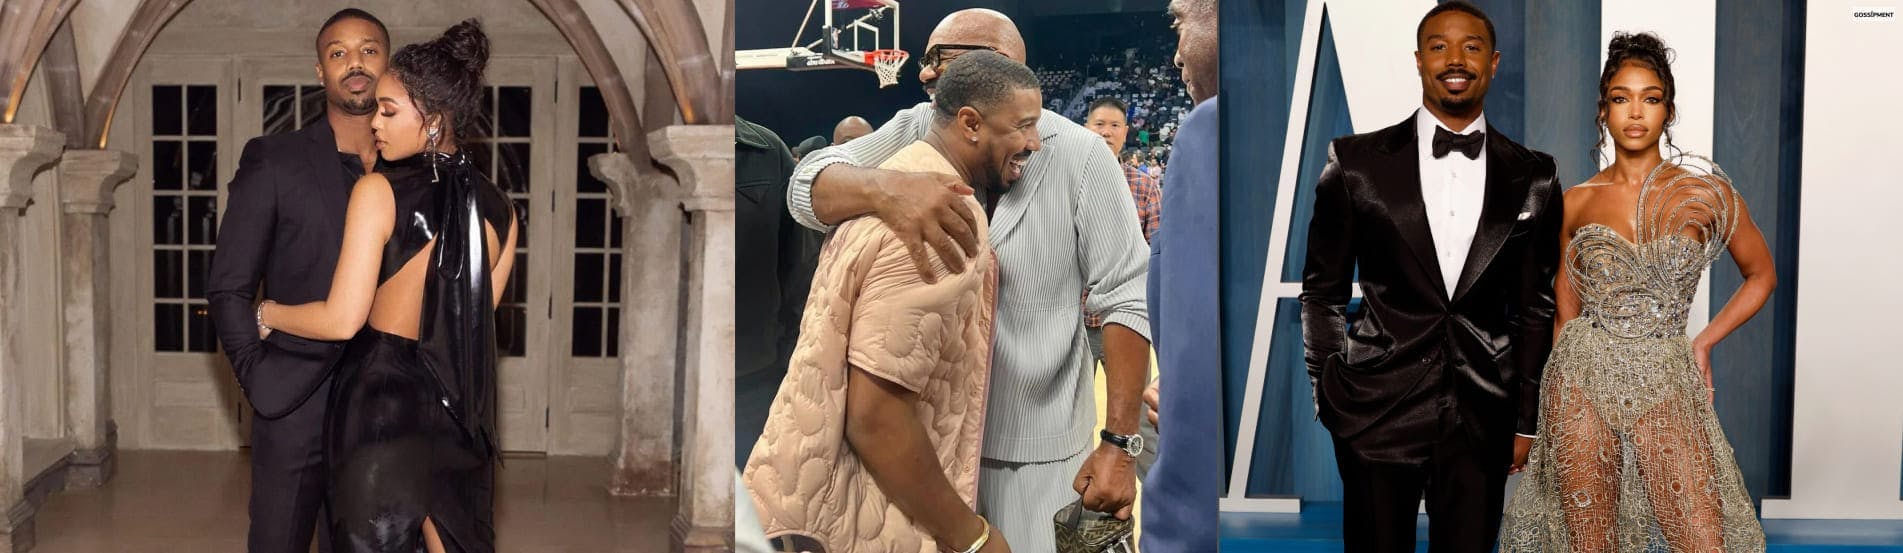 Cover Image for Steve Harvey Shares Friendly Hug With Daughter Lori Harvey’s Ex Micheal B.Jordan A Year After Their Breakup